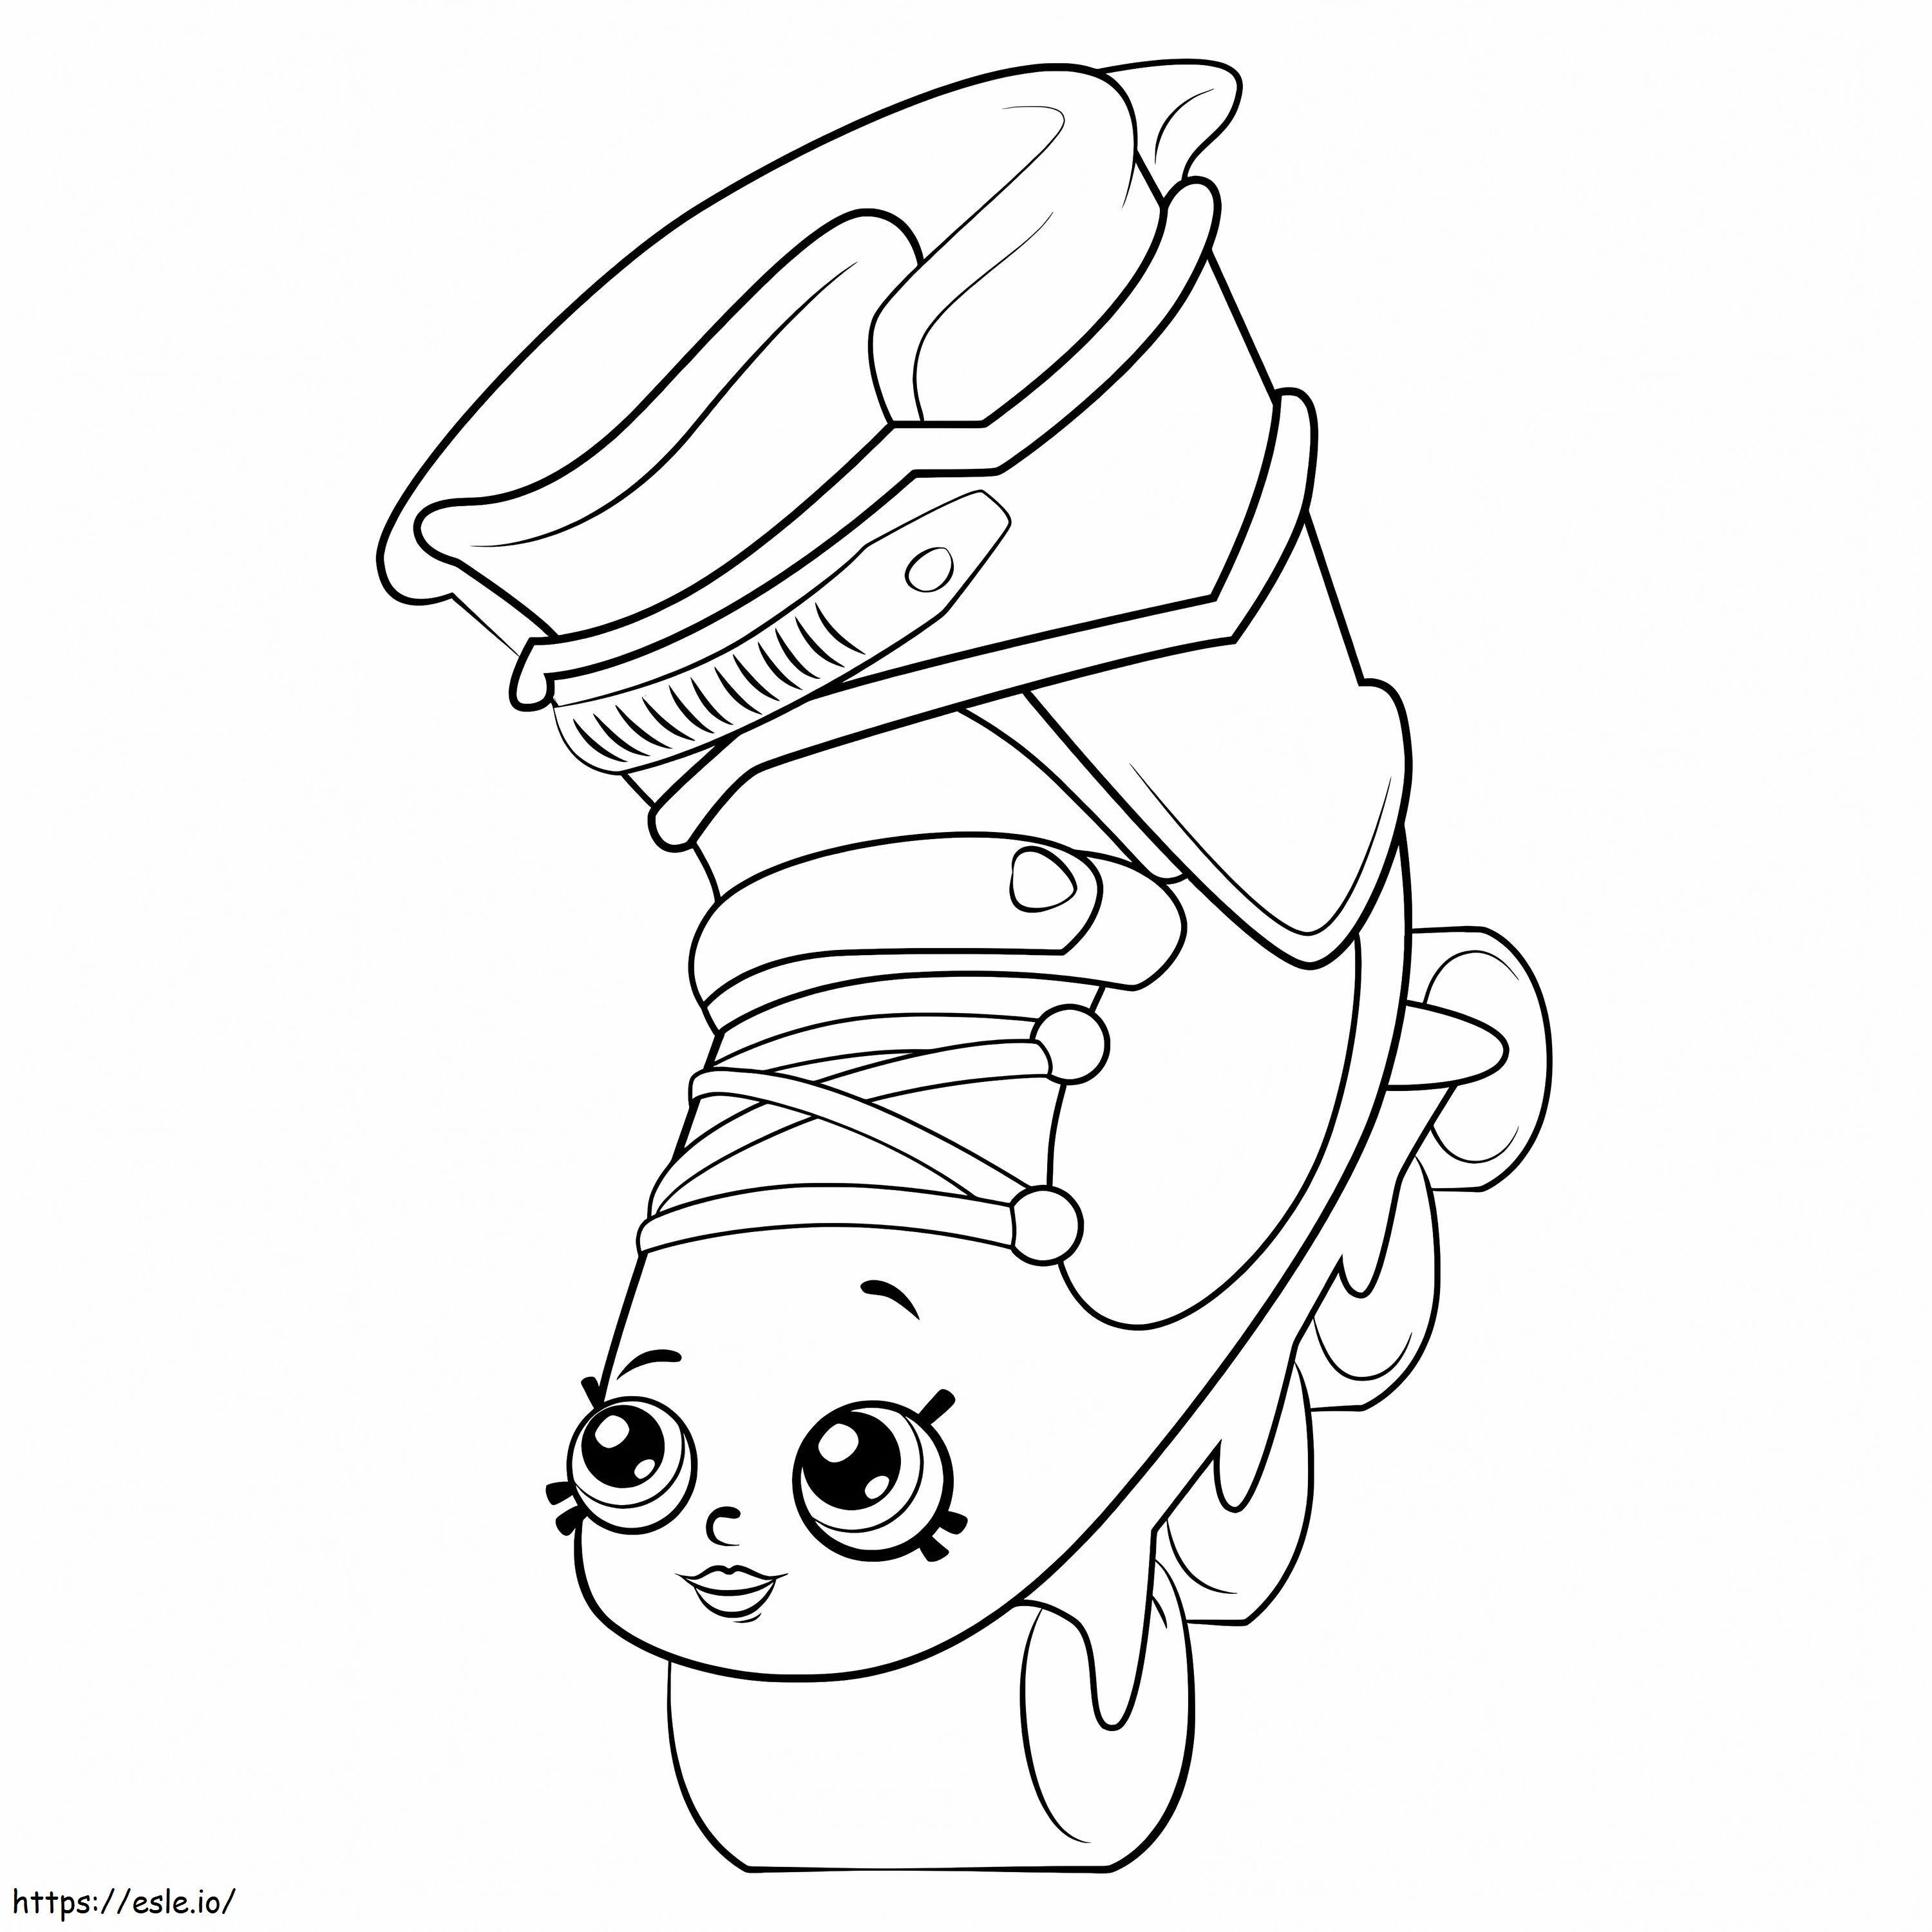 Lola Roller Blade Shopkin coloring page